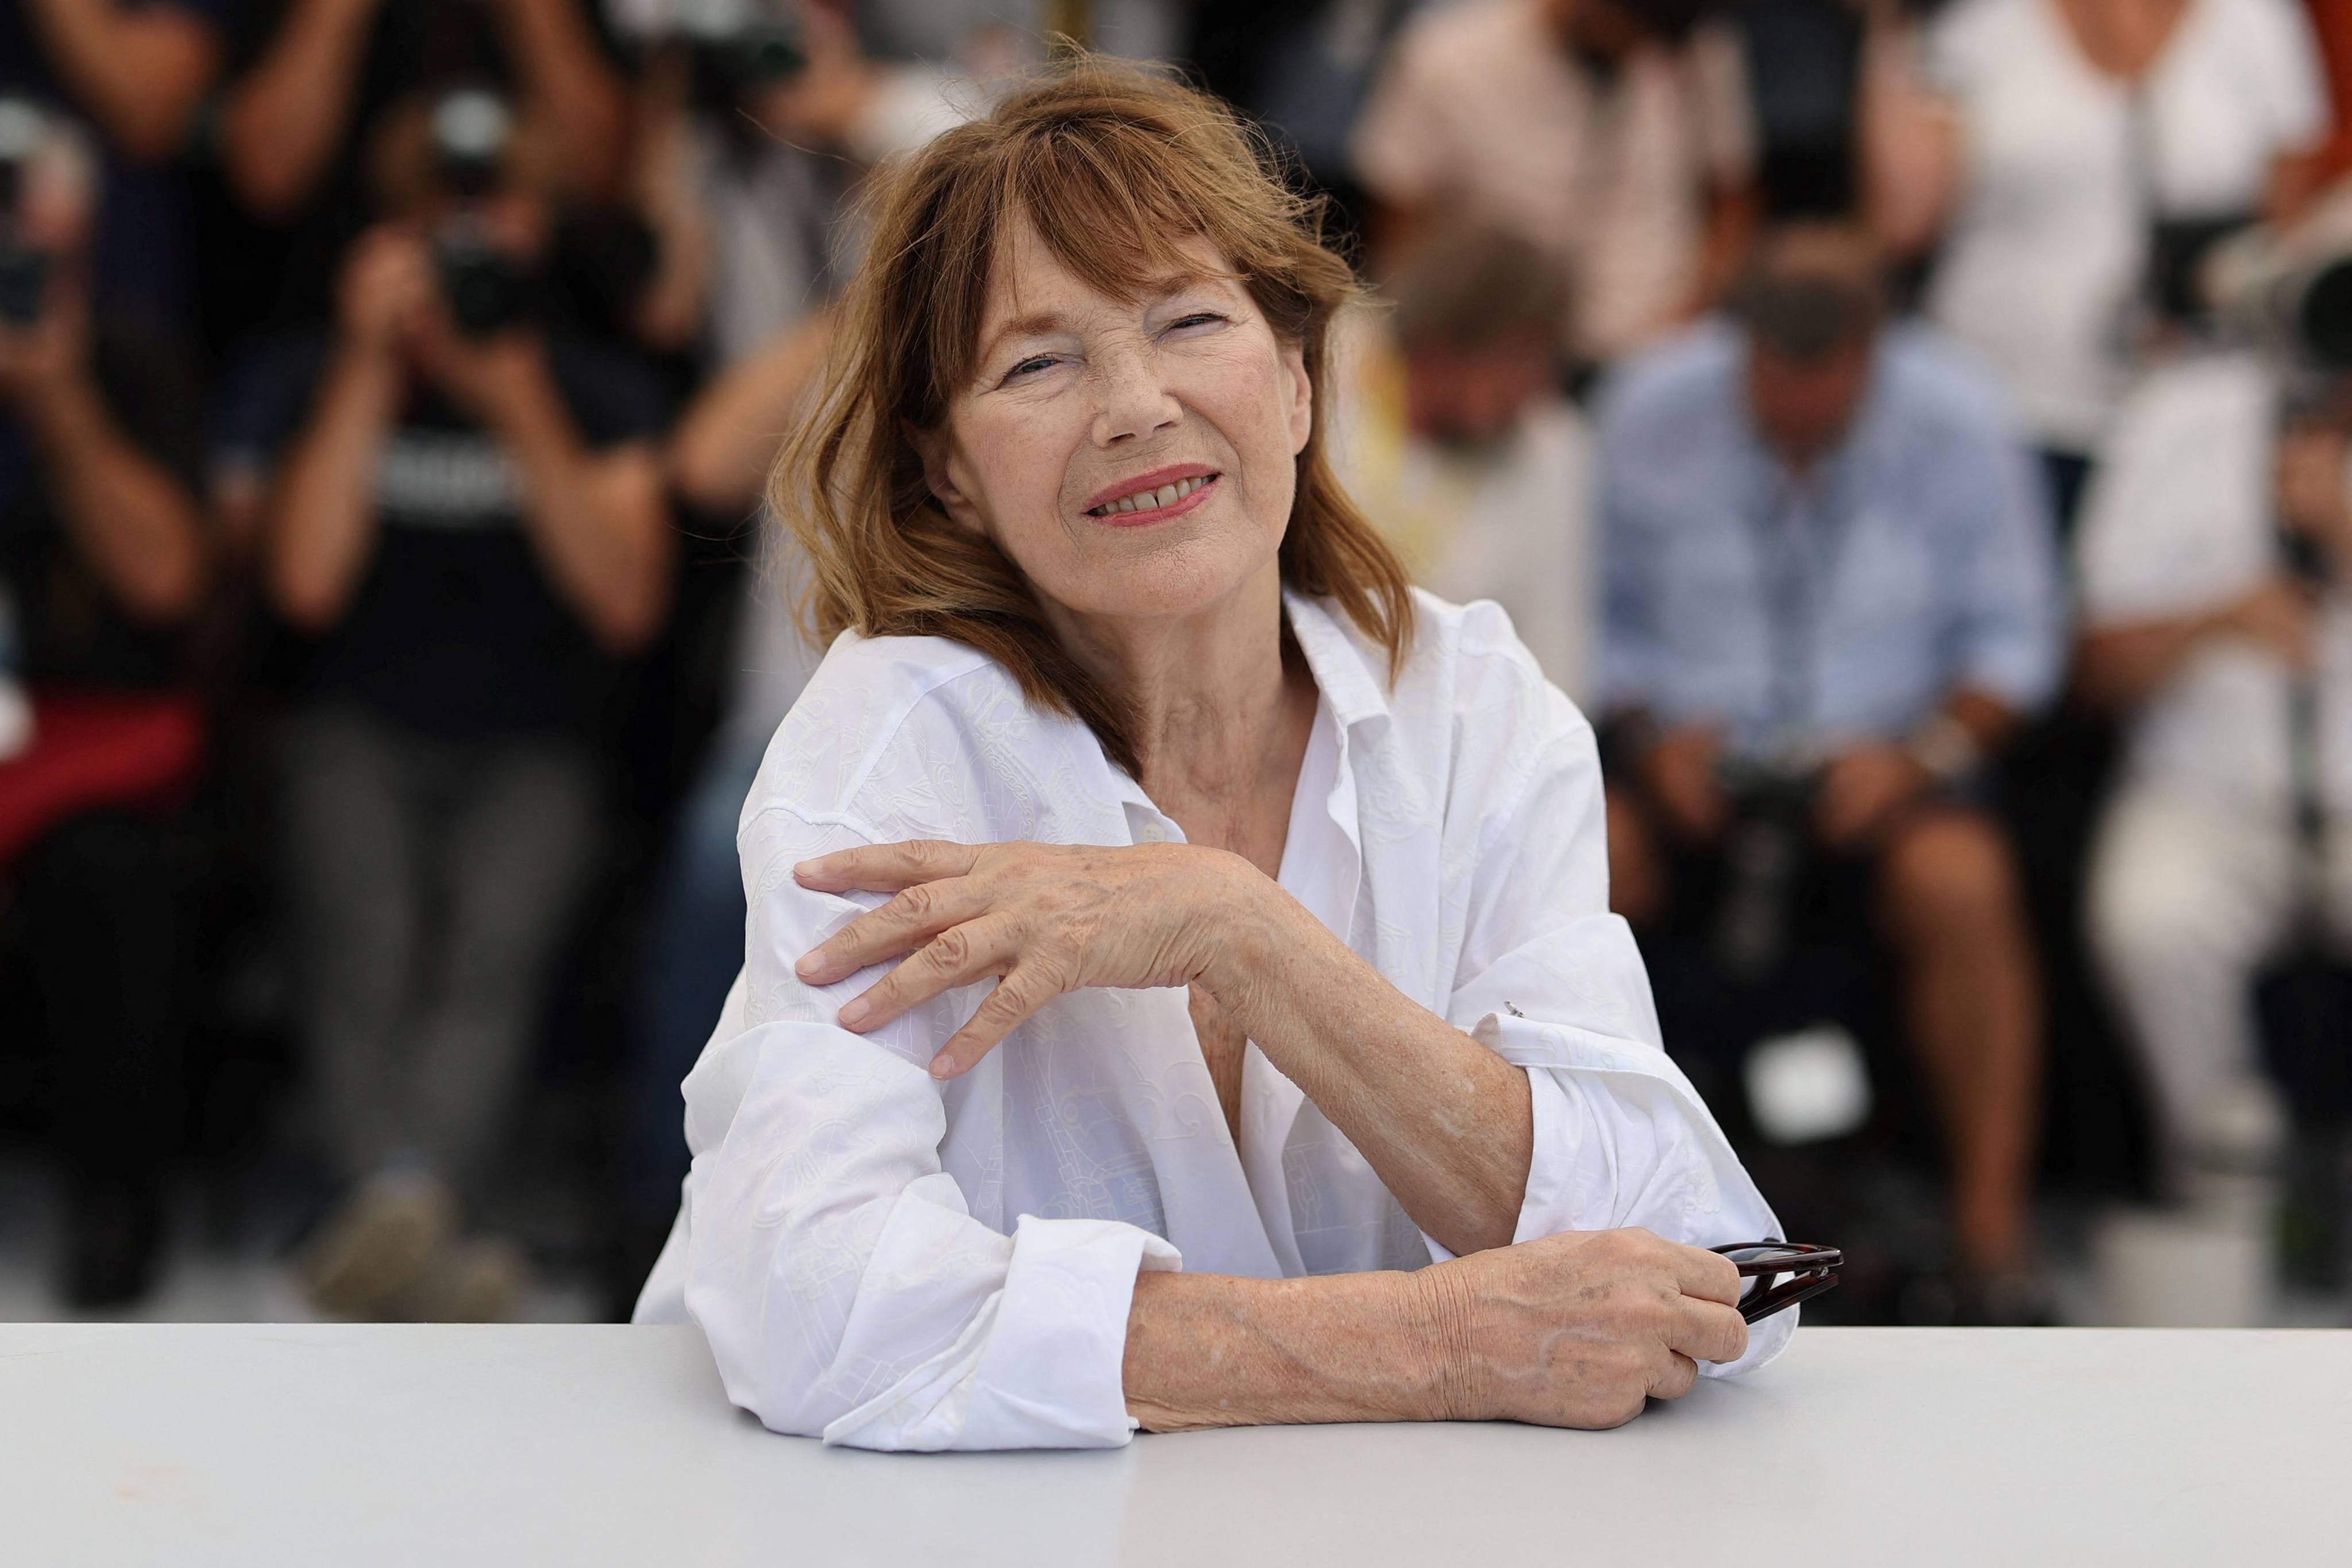 British-born singer and actress Jane Birkin poses at the 74th edition of the Cannes Film Festival in Cannes, France, in July 2021. Photo: AFP